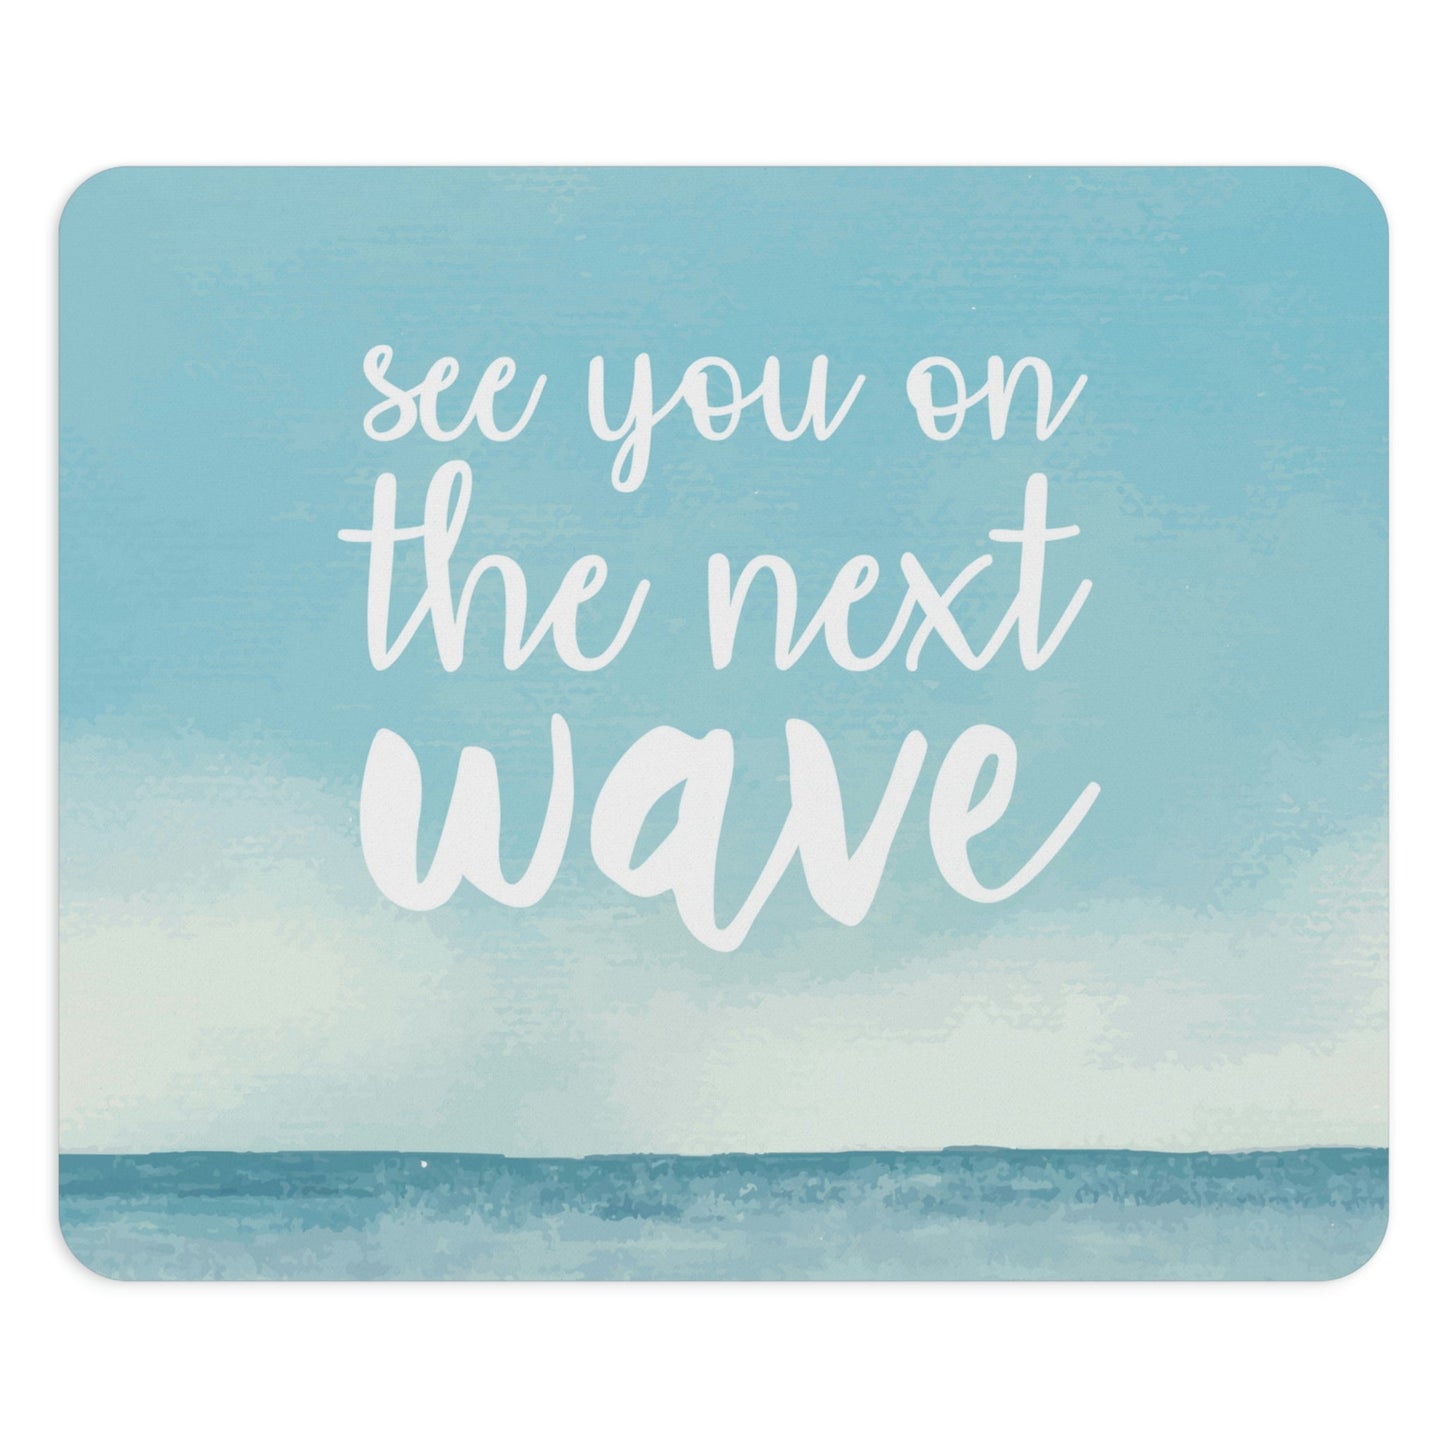 See You On the Next Wave Surfers Slogan Ergonomic Non-slip Creative Design Mouse Pad Ichaku [Perfect Gifts Selection]